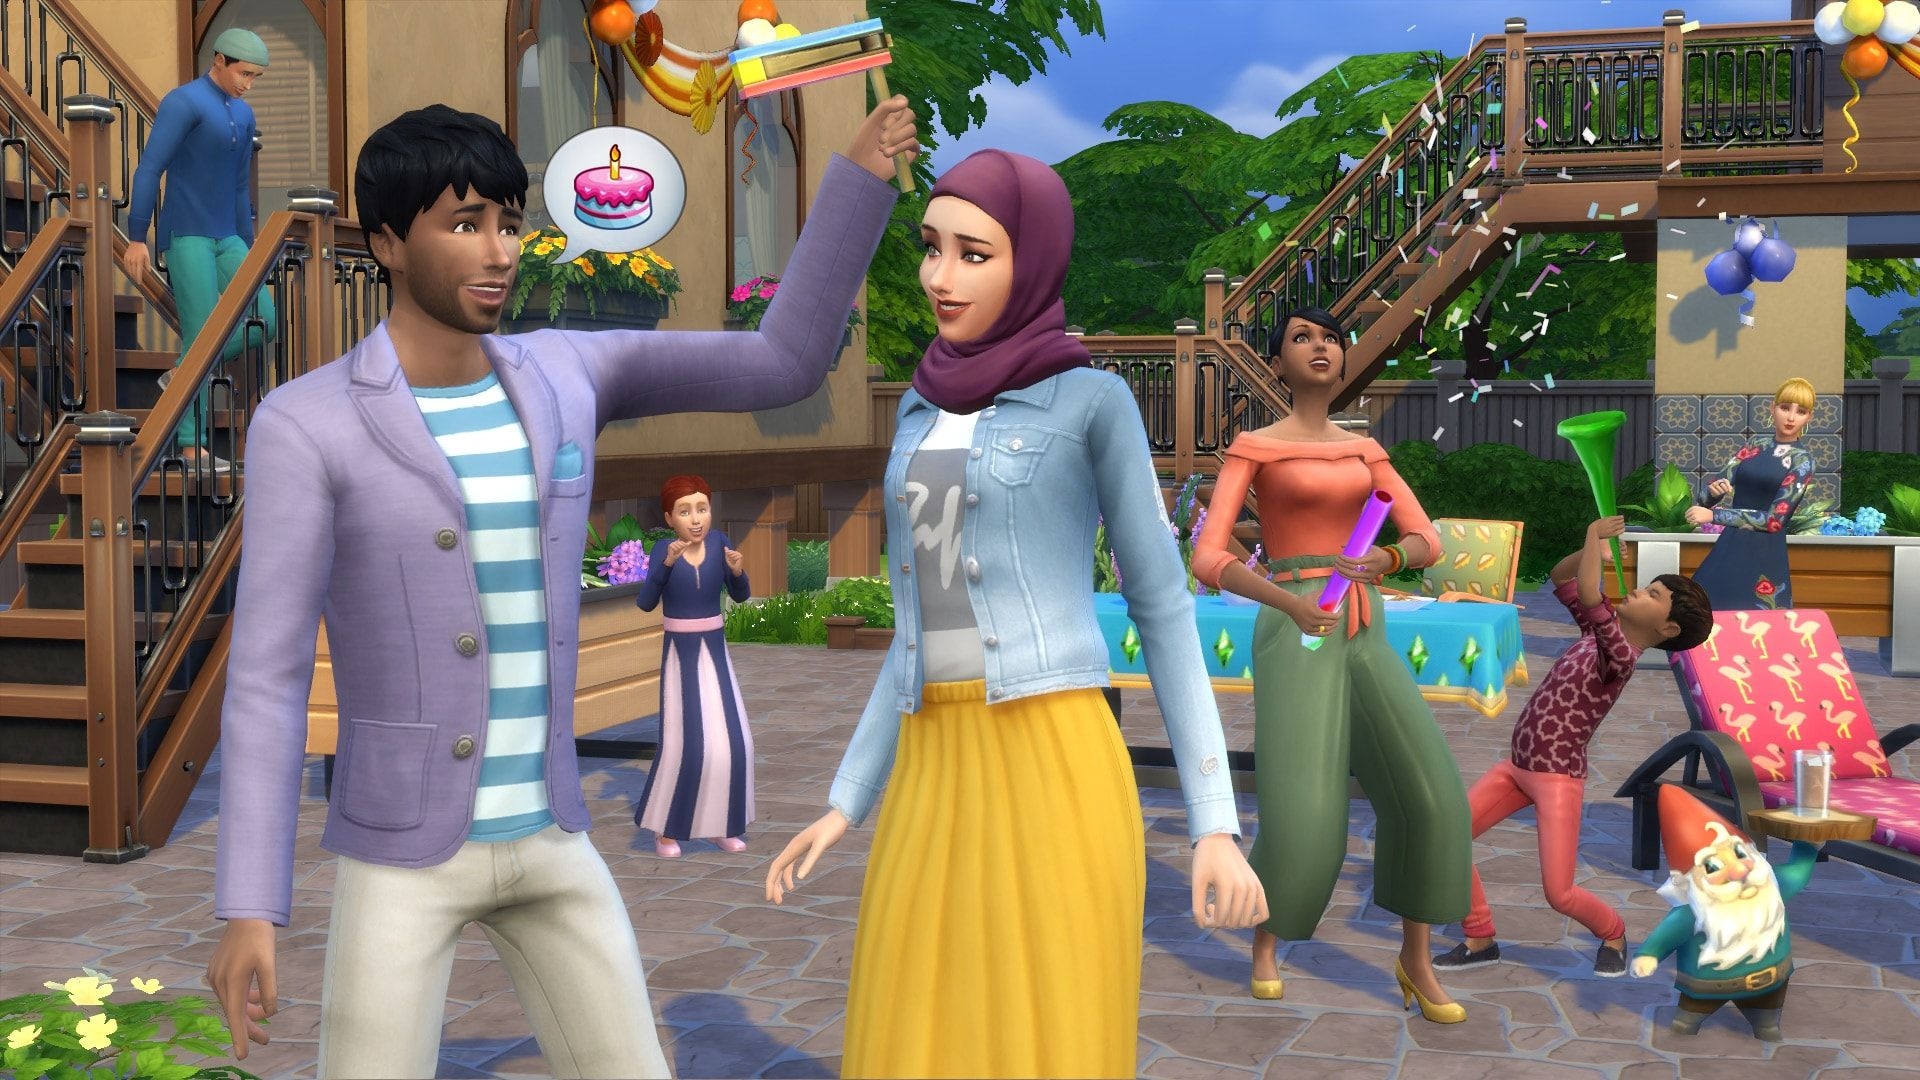 The Sims Franchise Celebrates Its 21st Birthday With 21 Gifts For Players